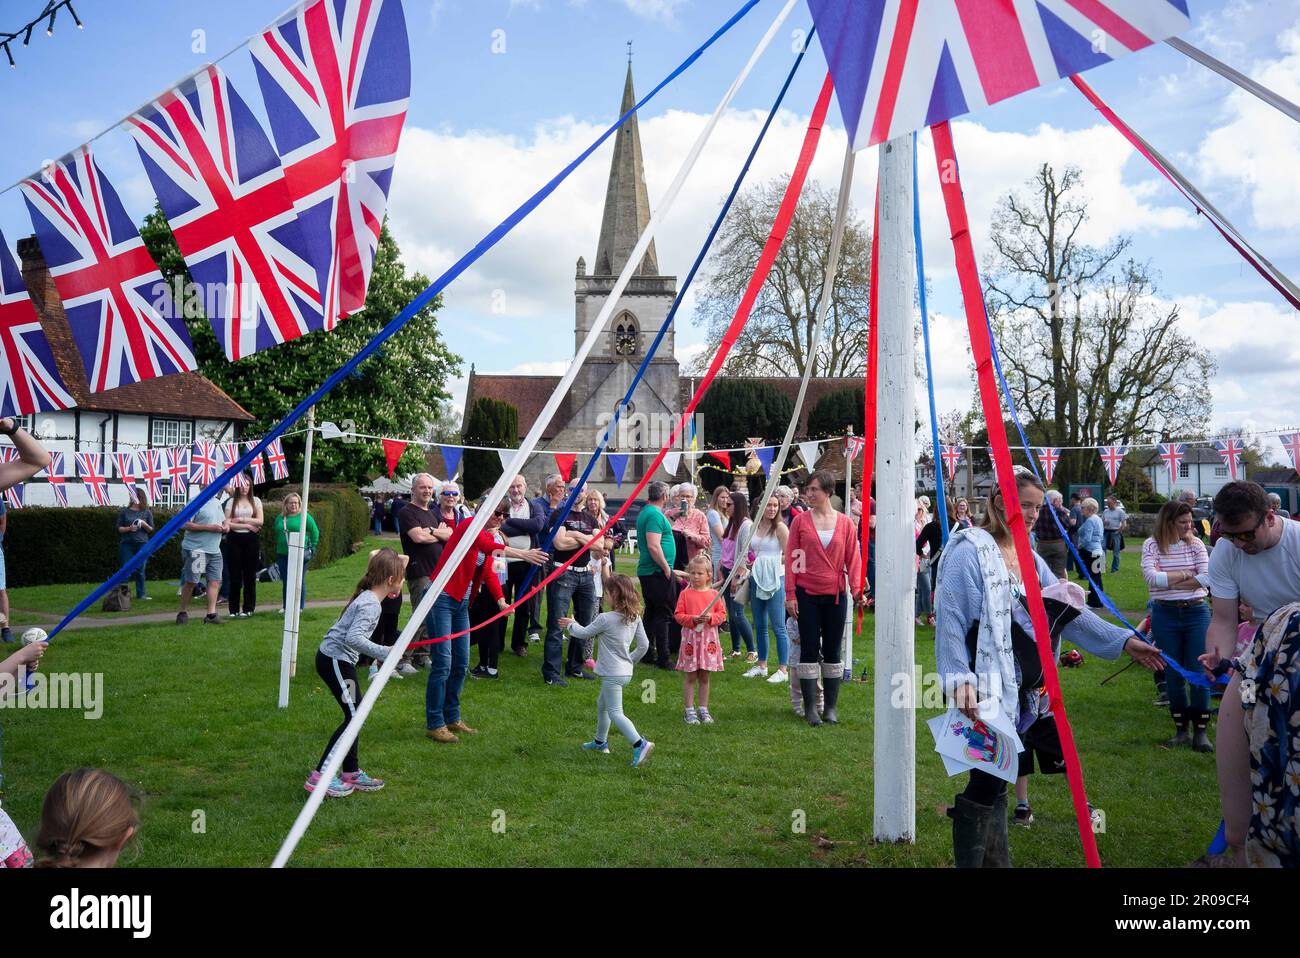 Brockham, Surrey, England, UK. 7th May, 2023. Residents of Brockham village in the county of Surrey held festivities on the village green, along with other community parties taking place throughout the United Kingdom. Children learnt the joys of the ancient tradition of maypole dancing, Mum's were subjected to a ''˜best dressed in toilet roll paper by children' competition outside the village pub, and others enjoyed tea and cake courtesy of the church hall. Street parties and celebrations continued throughout the United Kingdom over a special extended holiday weekend. (Credit Ima Stock Photo